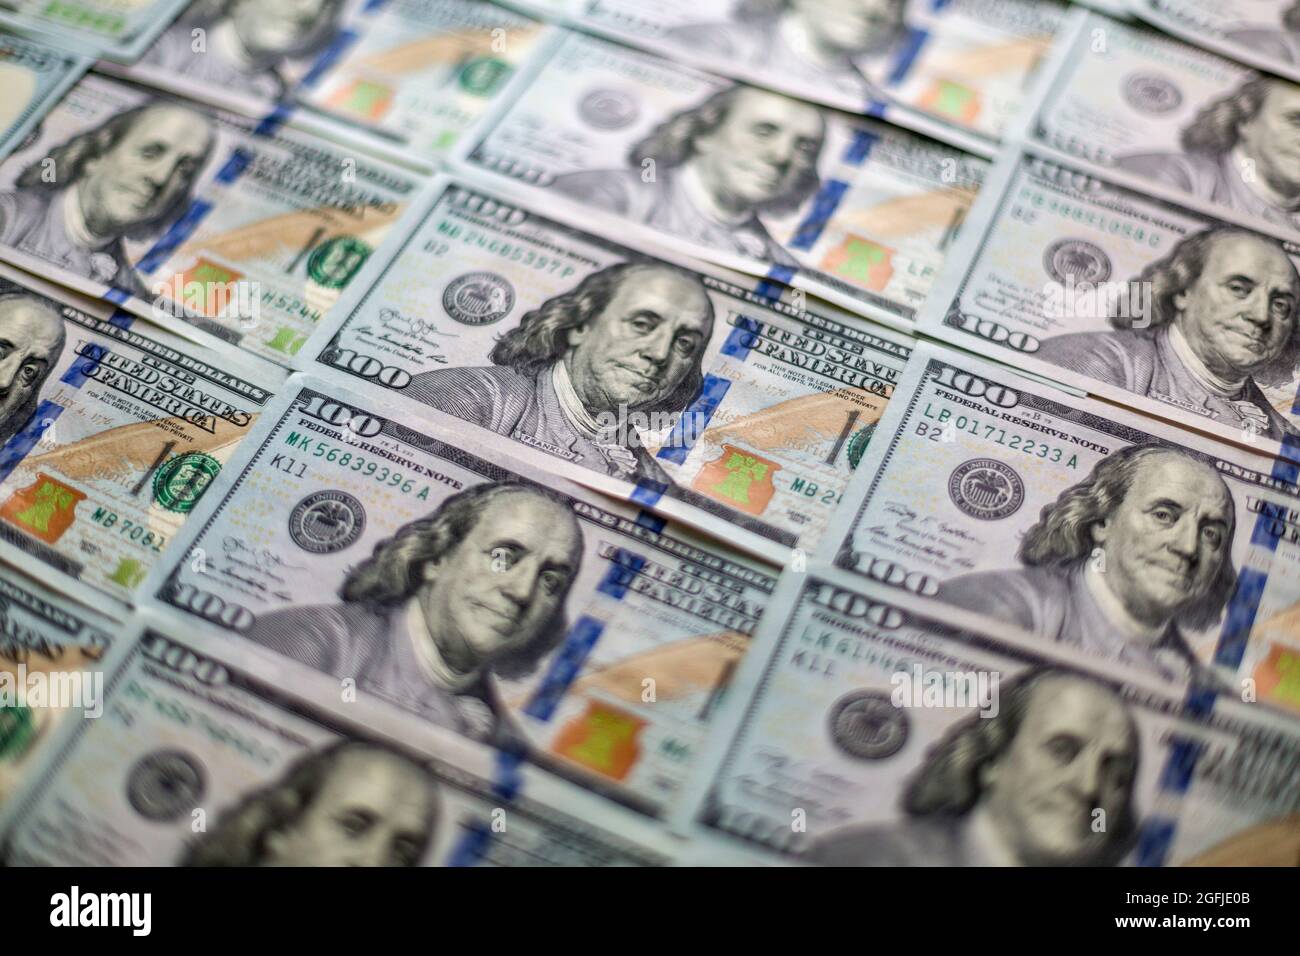 One hundred usd banknotes money as background, top view. Closeup view of dollars, US currency finance theme Stock Photo